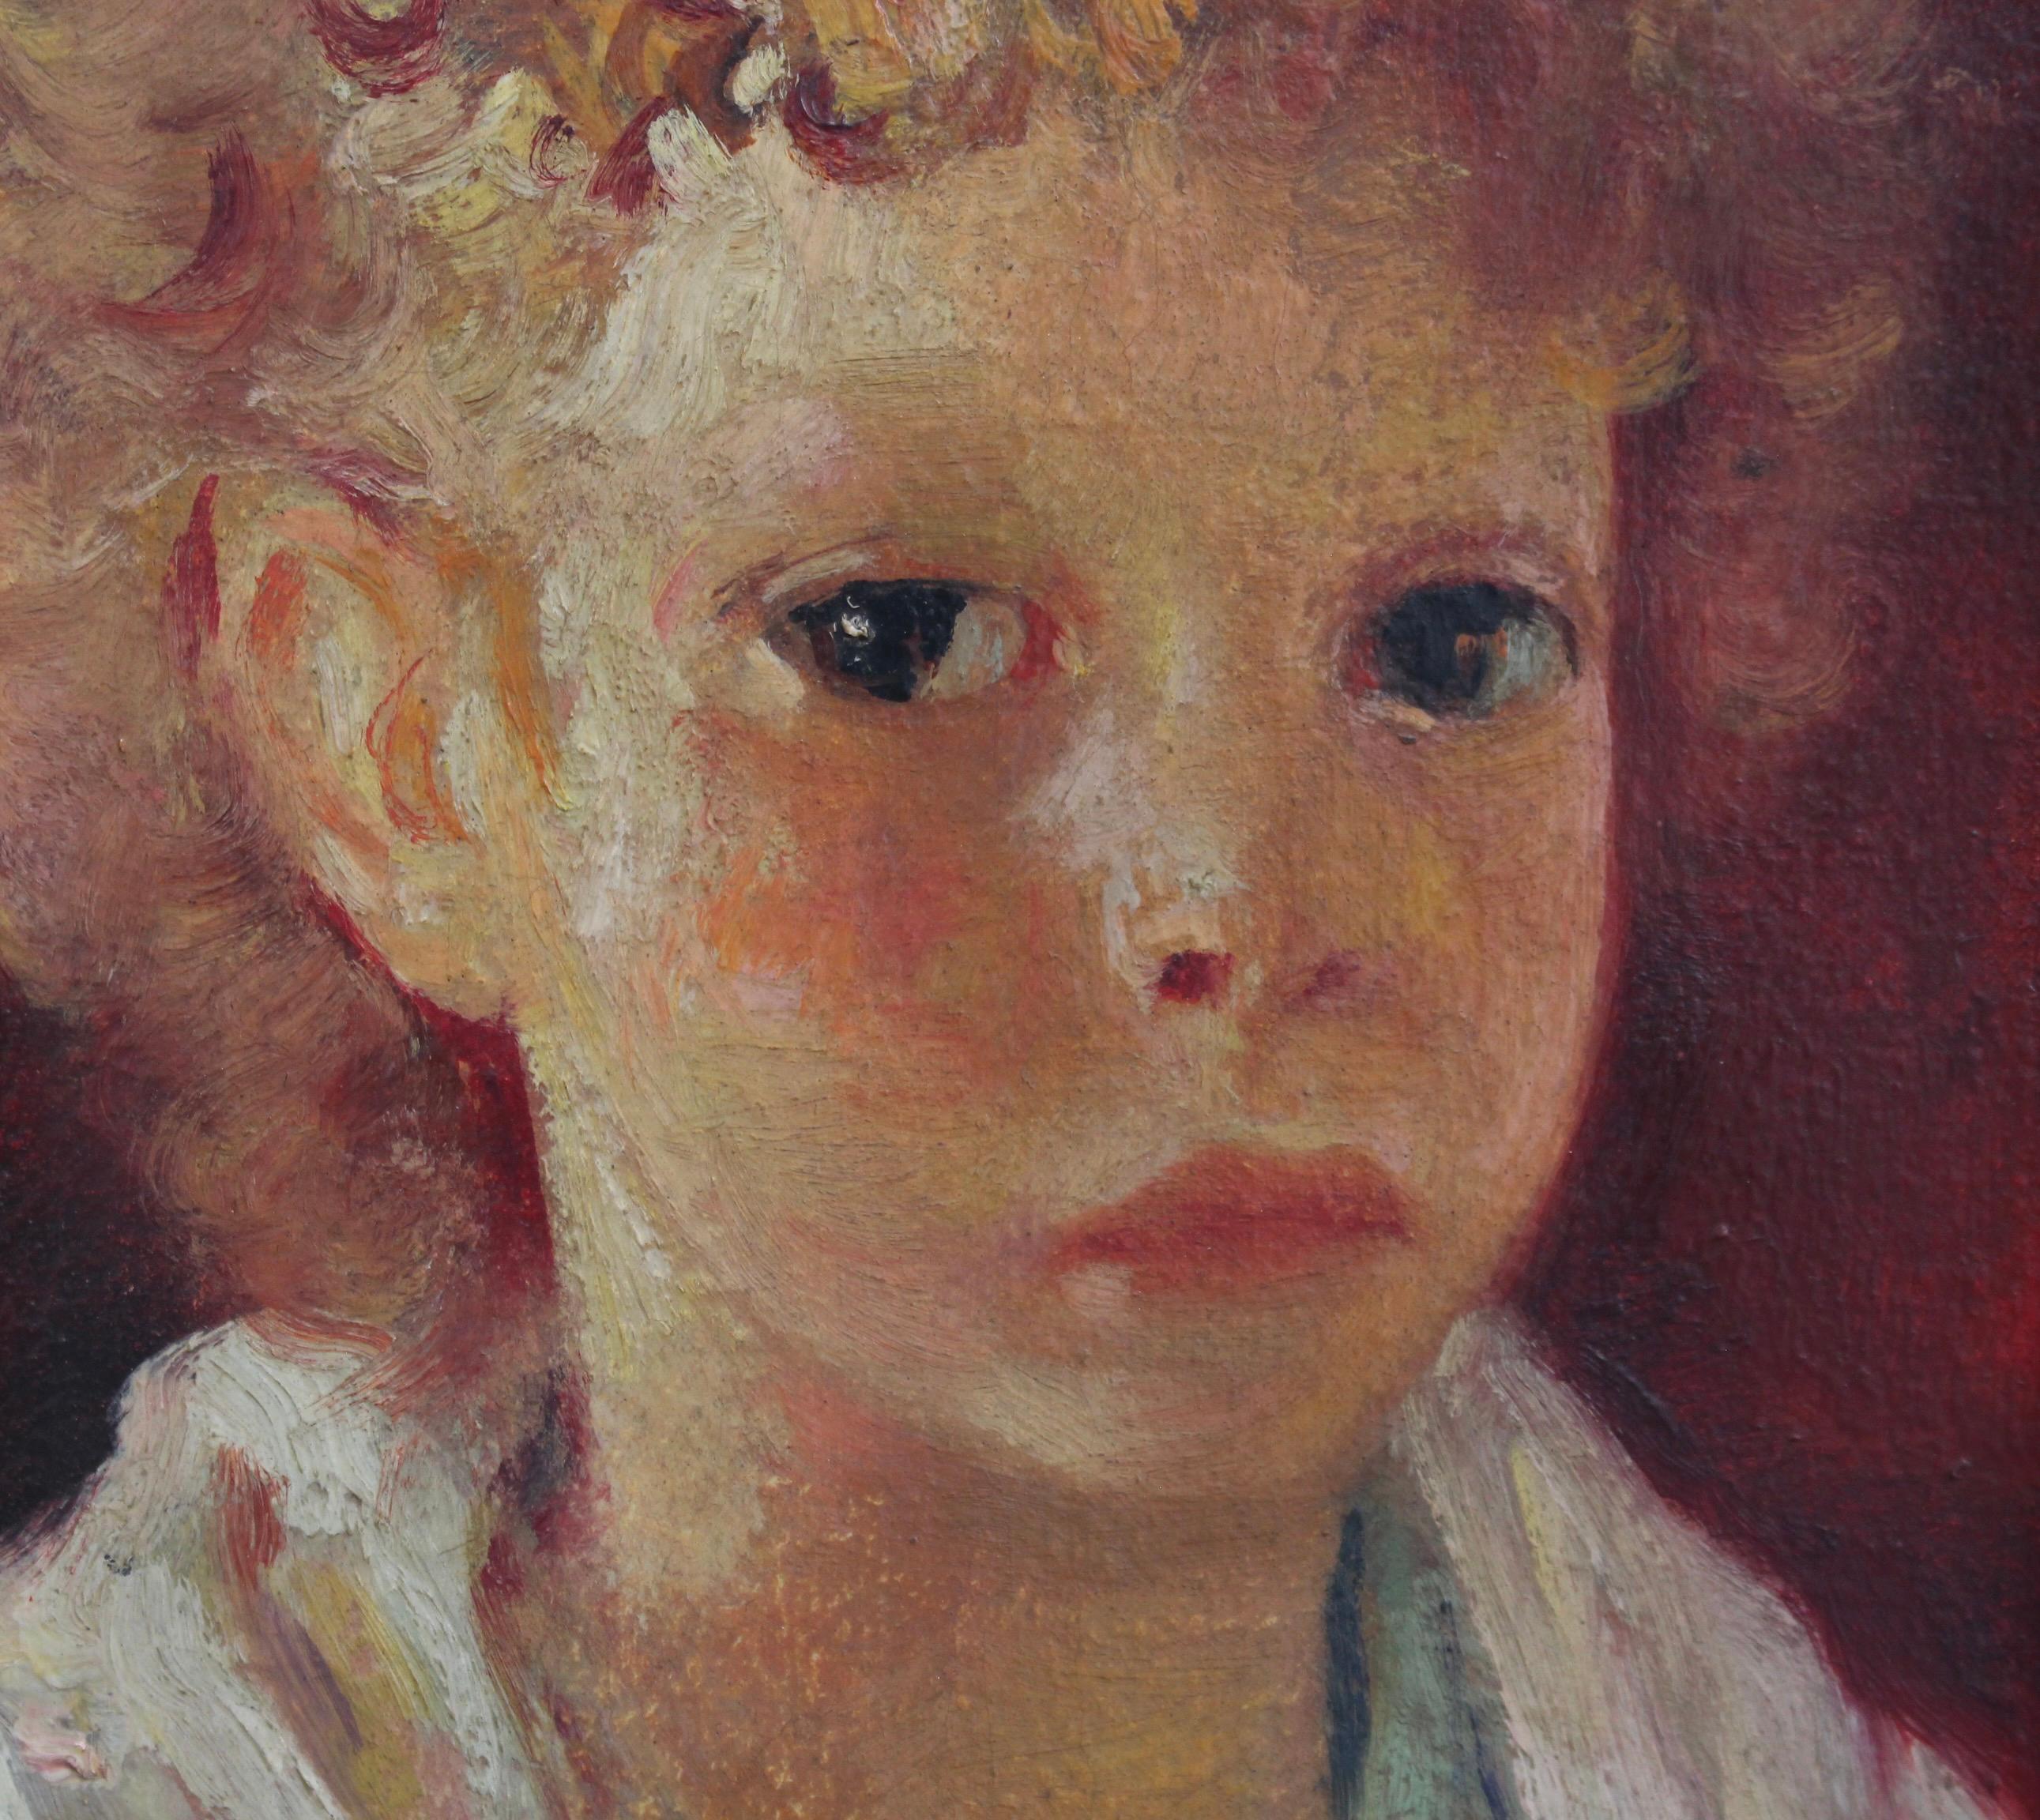 'Portrait of Boy' by Luigi Corbellini (circa 1930s). The artist painted this endearing young boy whose name remains unknown. Perhaps the slightly timid expression on his face ensues from his curiosity as to why his day is spent sitting still for